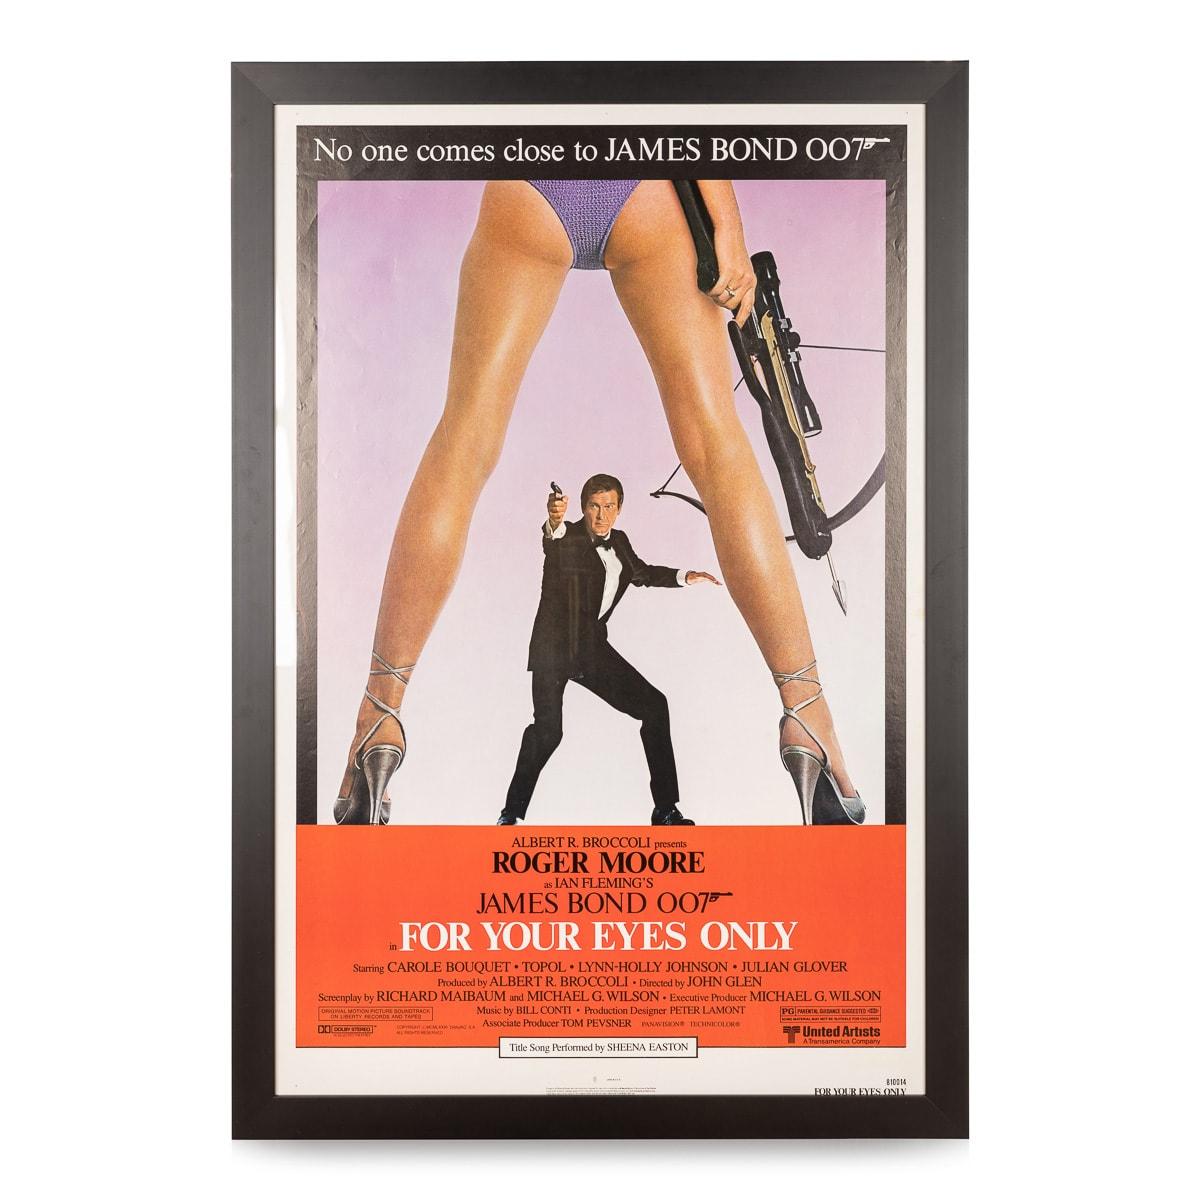 A rare and original poster from the James Bond 007 blockbuster, For Your Eyes Only. A 1981 British spy film directed by John Glen (in his feature directorial debut) and produced by Albert R. Broccoli. The film stars Roger Moore as the fictional MI6